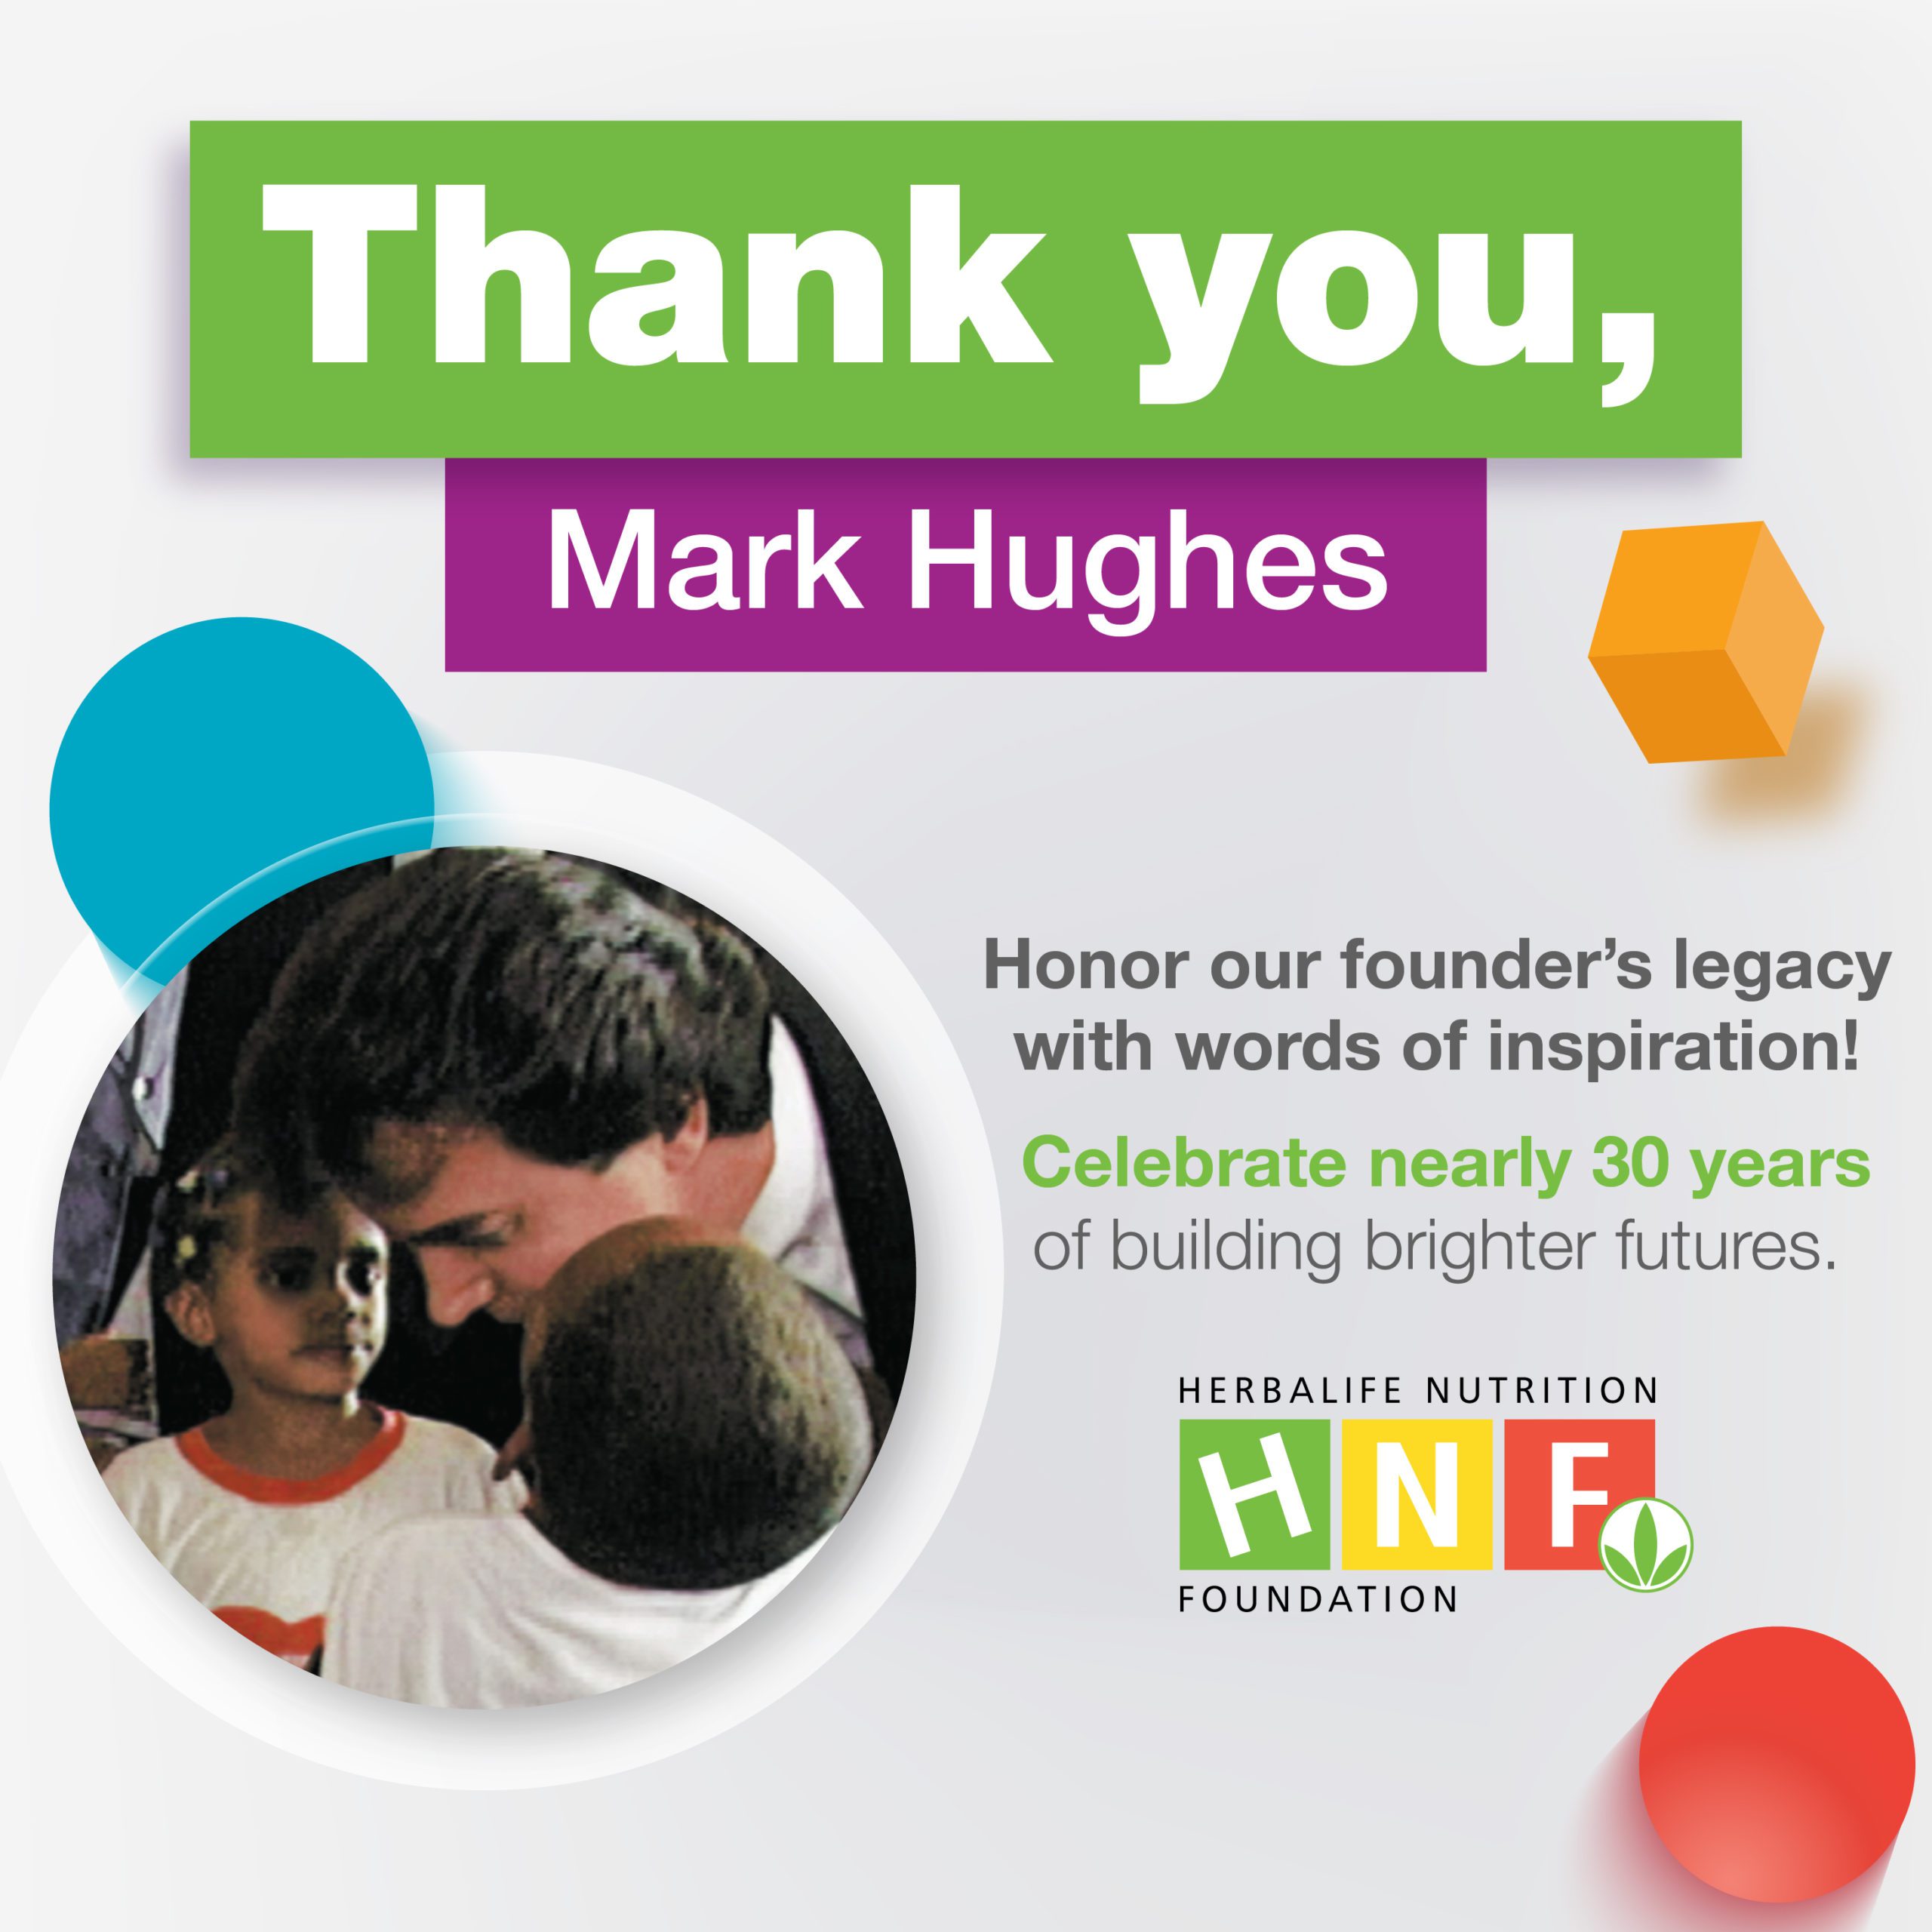 An eCard image featuring a photo of Mark Hughes with two children, and text that reads "Thank you, Mark Hughes. Honor our founder's legacy with words of inspiration! Celebrate nearly 30 years of building brighter futures." There are an assortment of geometric shapes and the HNF logo.